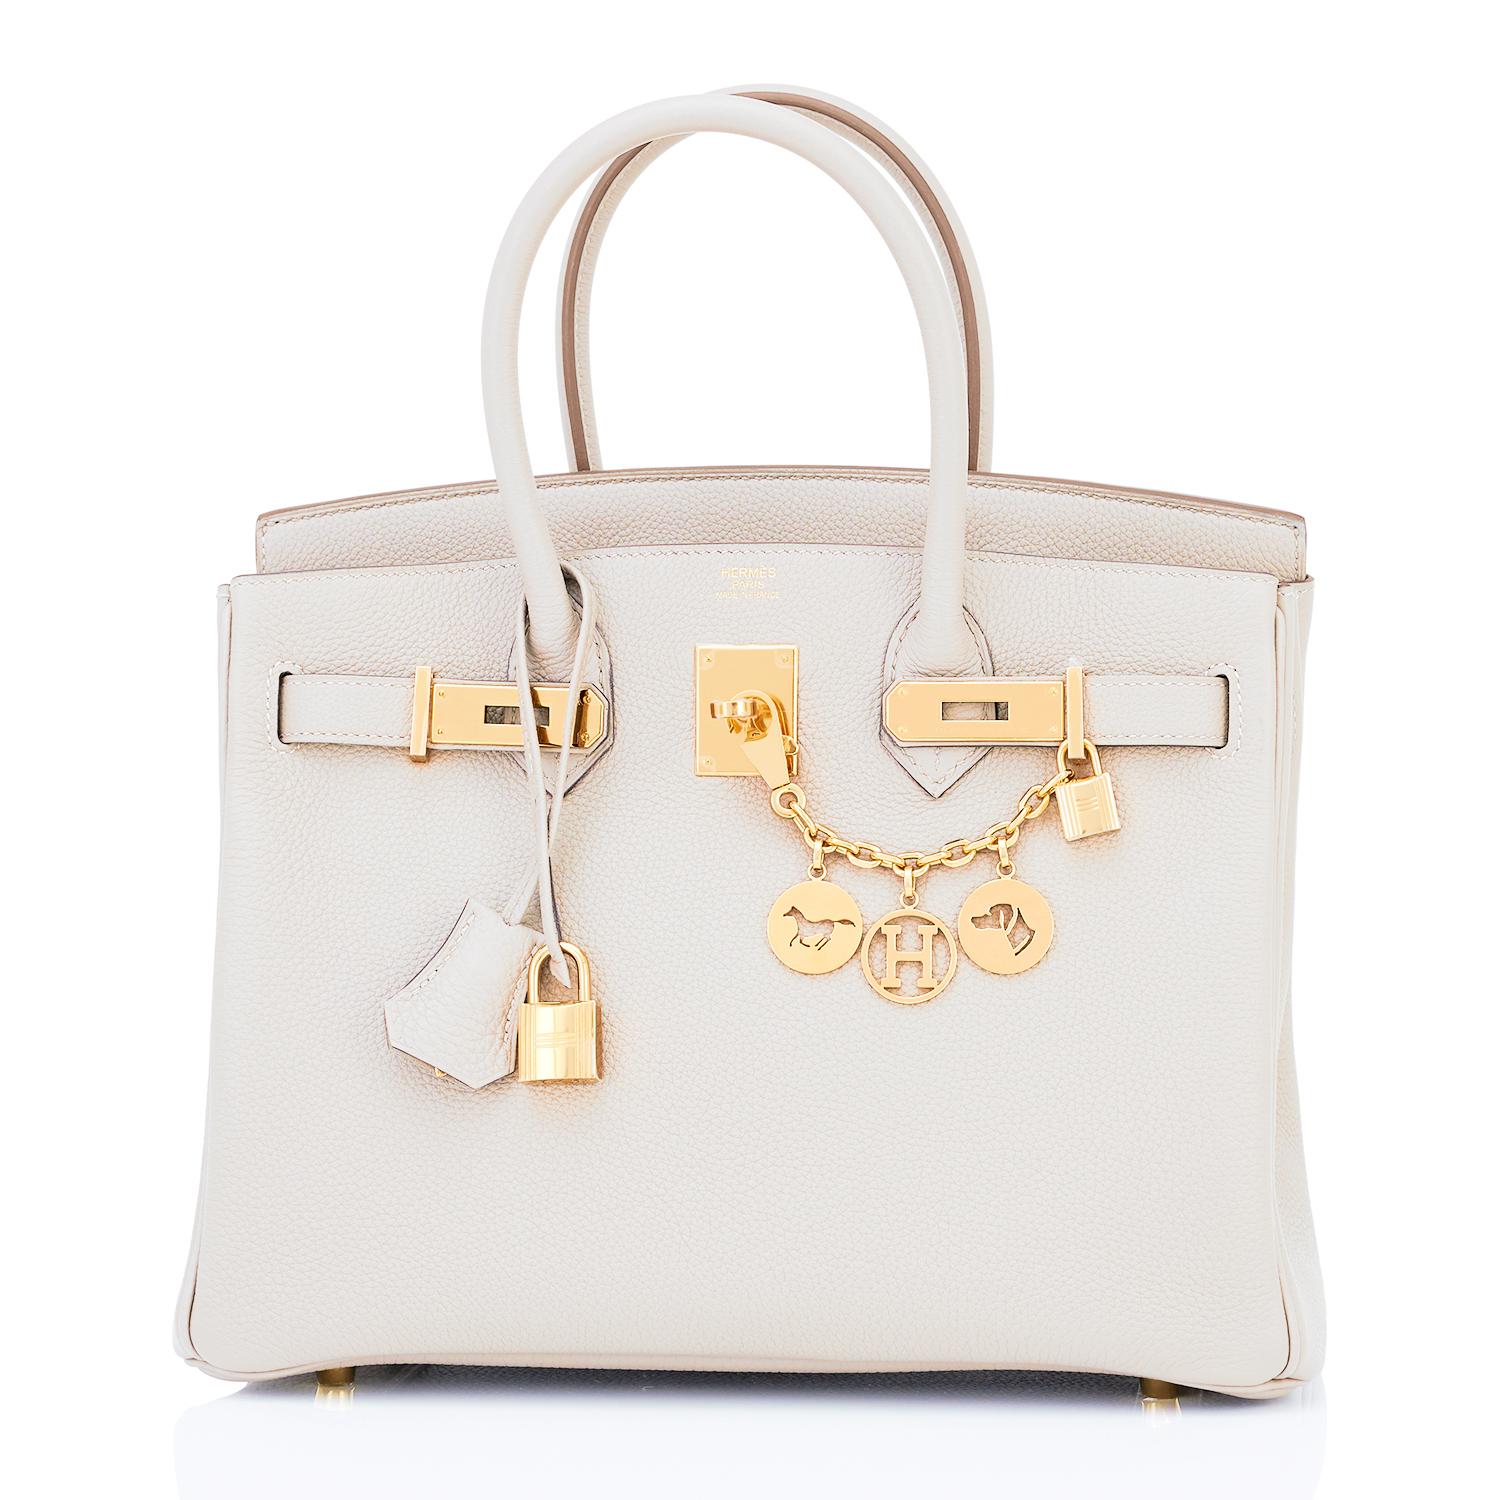 Hermes Birkin 30 Beton Gold Hardware Off White Bag U Stamp, 2022
Just purchased from Hermes store! Bag bears new interior 2022 U Stamp.
Brand New in Box.  Store Fresh. Pristine Condition (with plastic on hardware) 
Perfect gift! Comes in full set